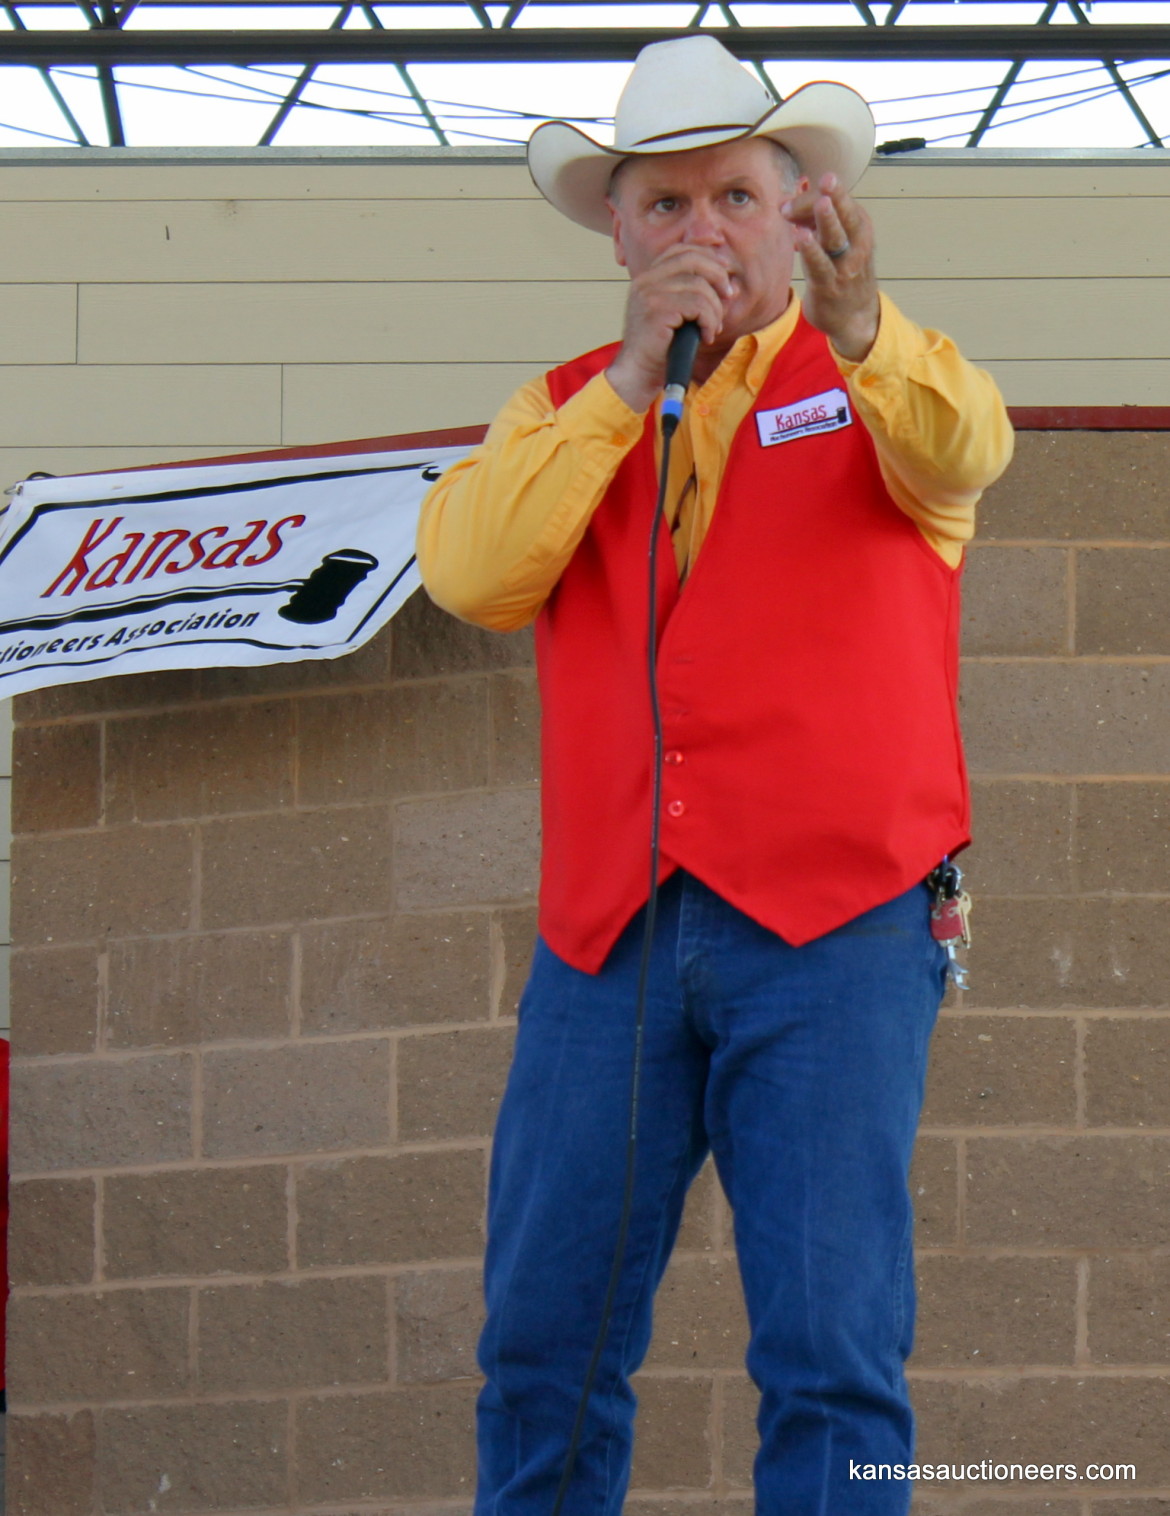 2012 Kansas Auctioneer Champion, Jeff Crissup, sells an item at the 2015 finals.